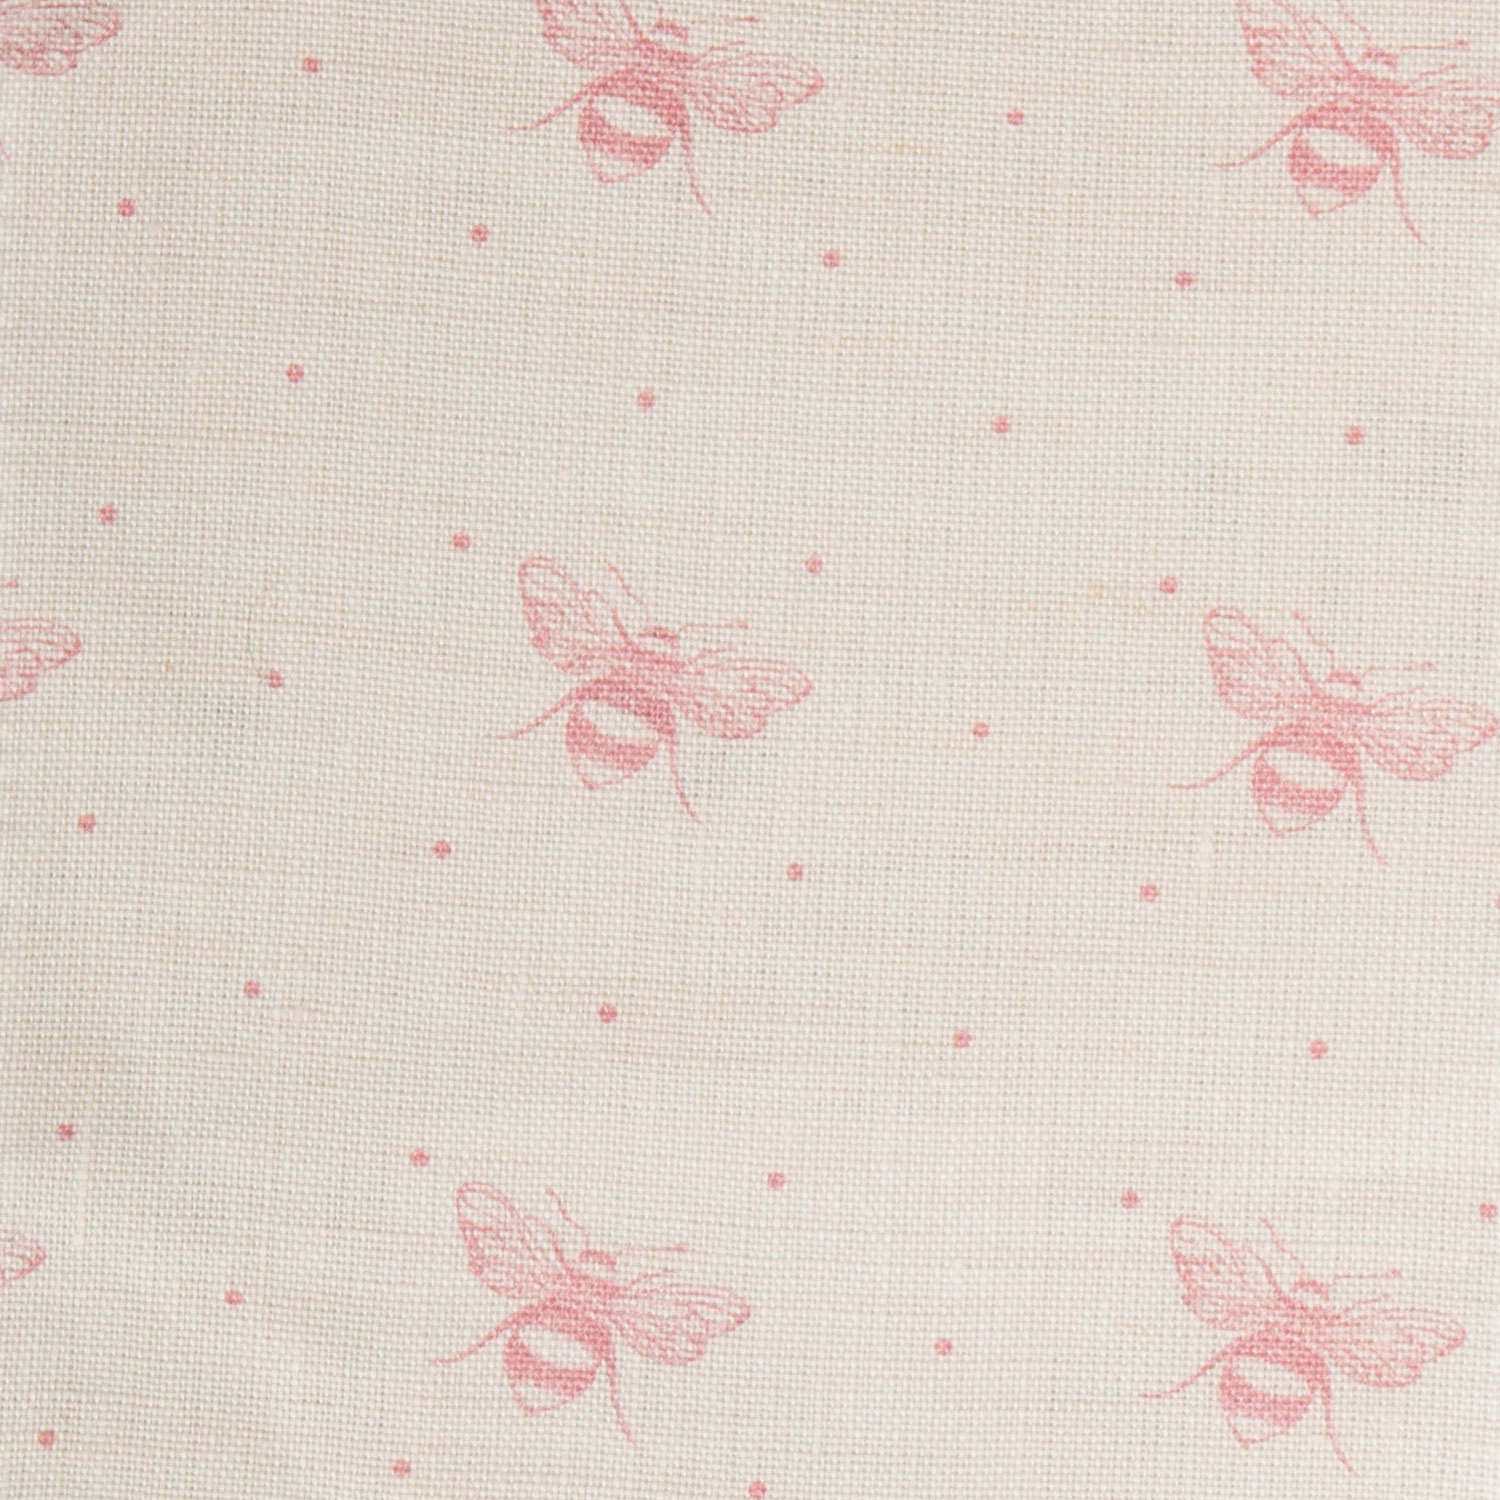 Just Bees, Blush Pink on Ivory